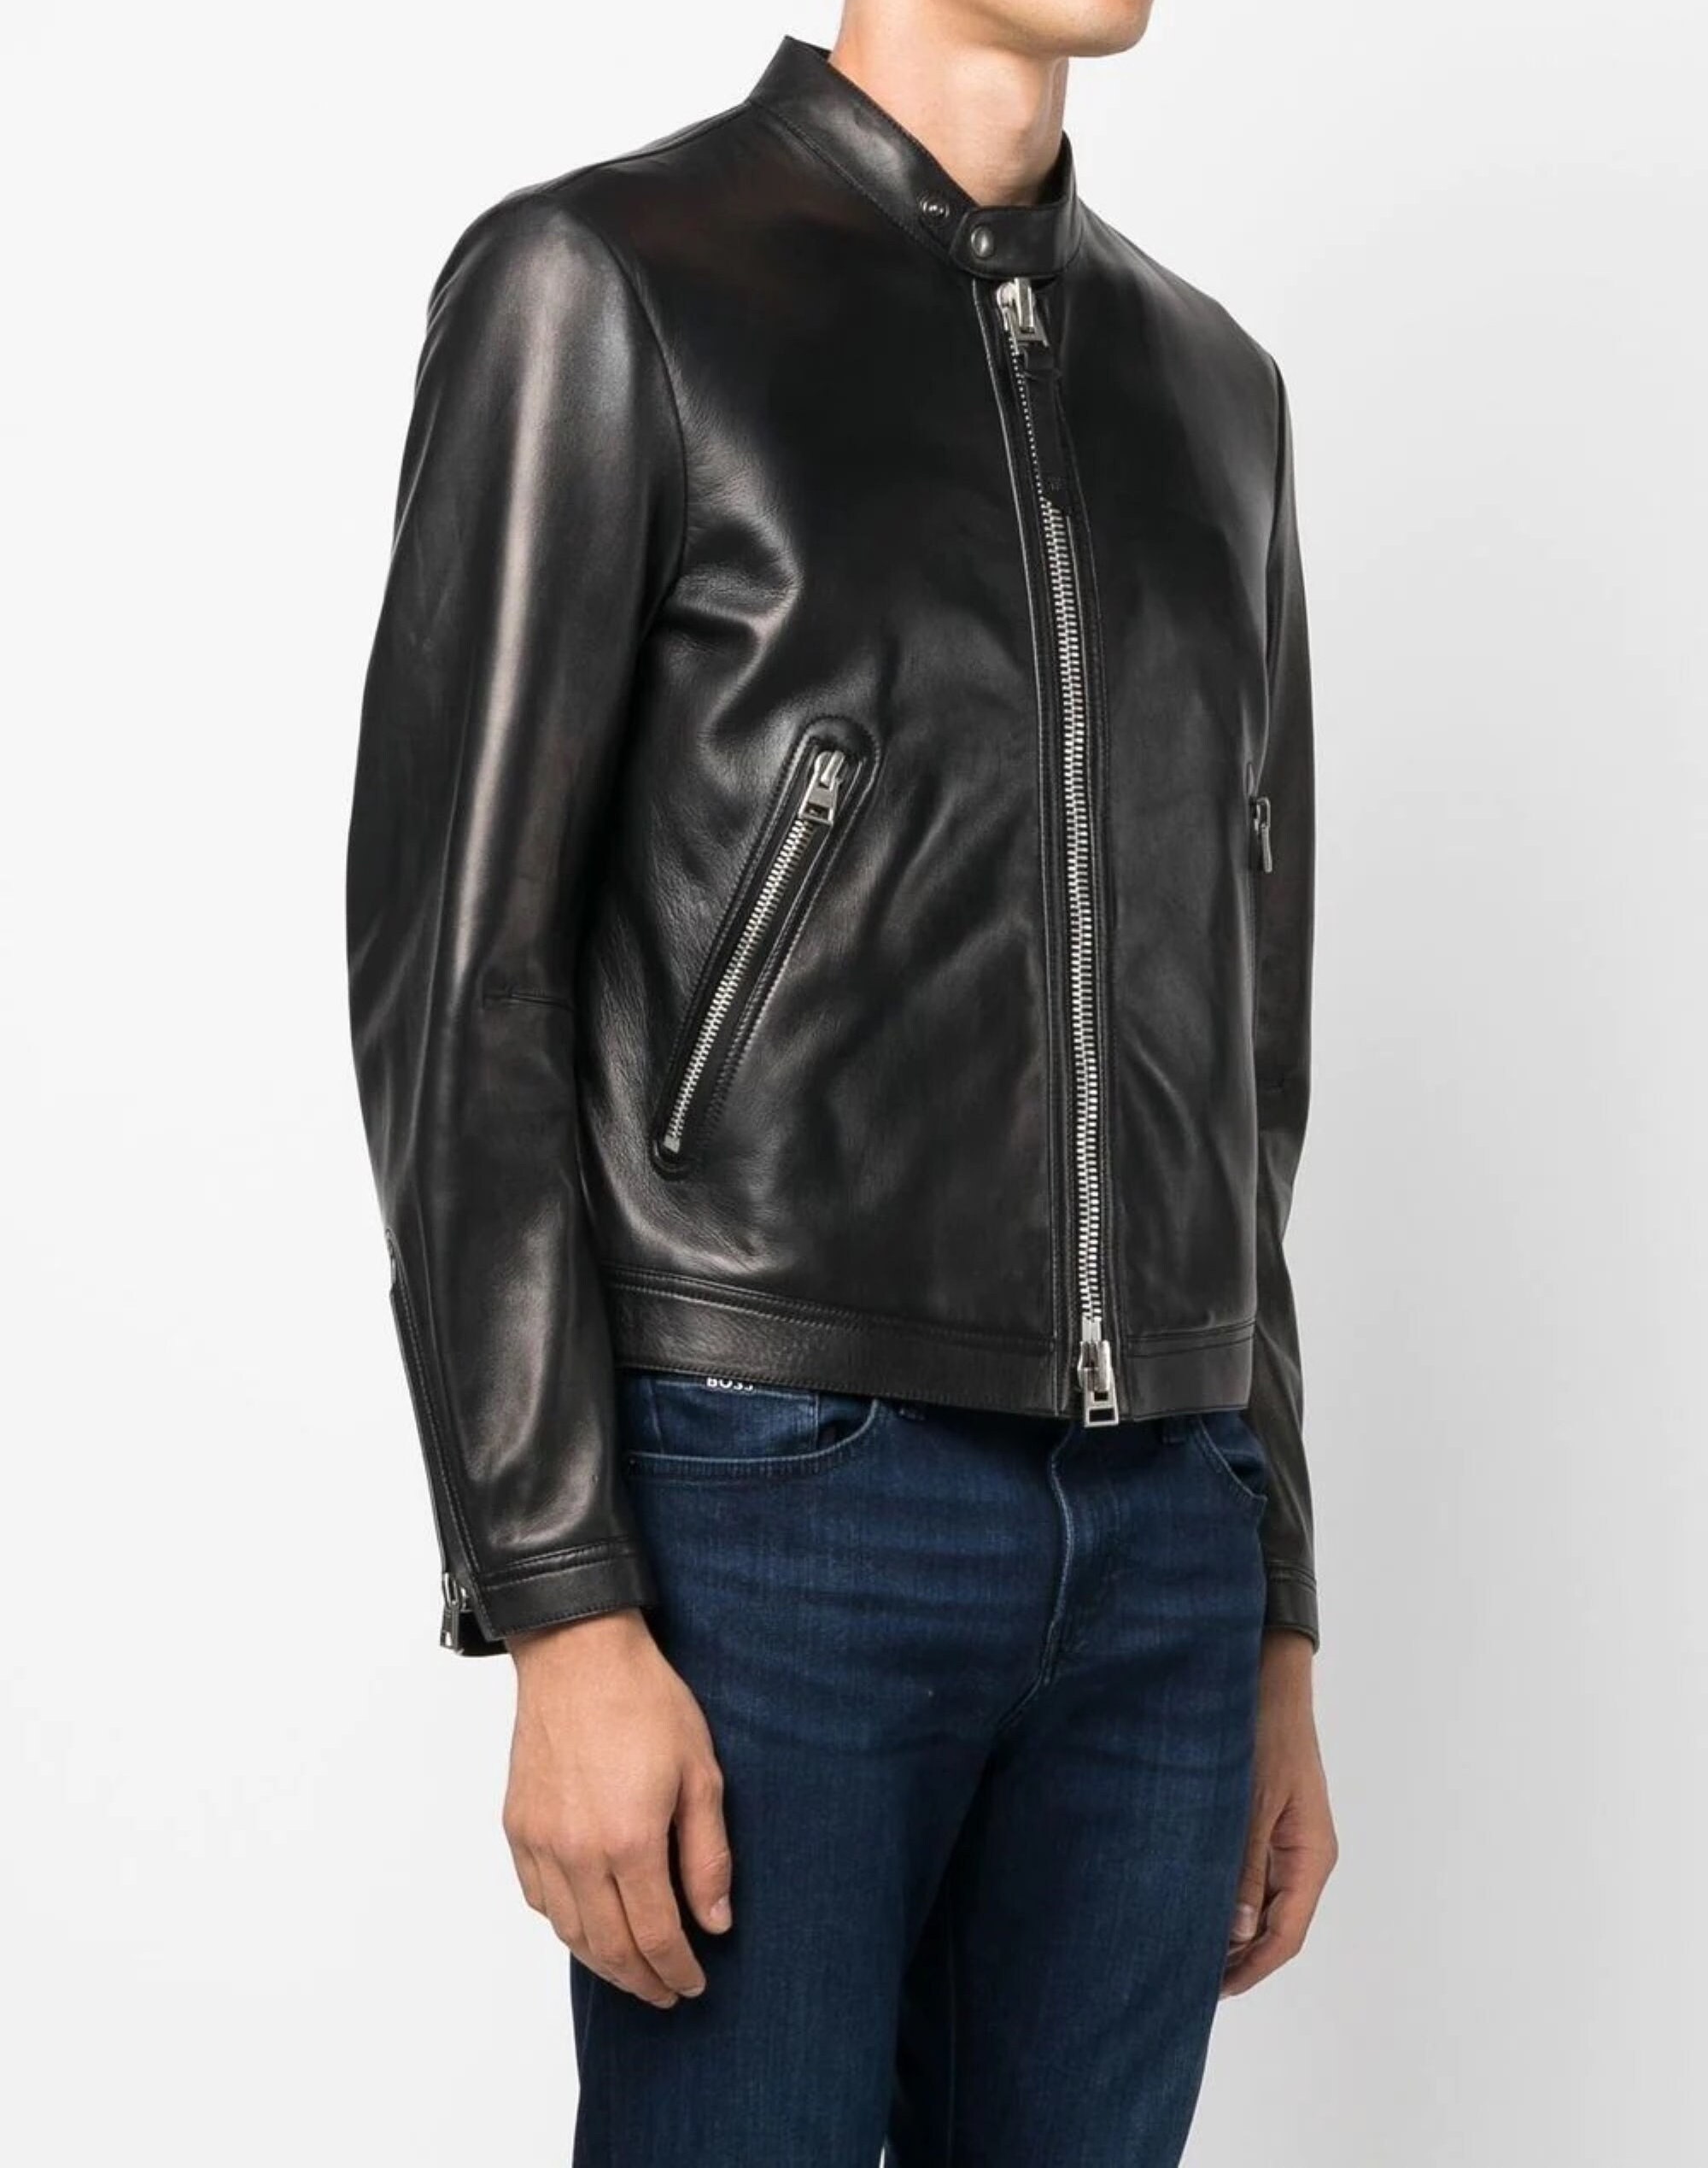 TOM FORD - I designed this black leather motorcycle jacket for my